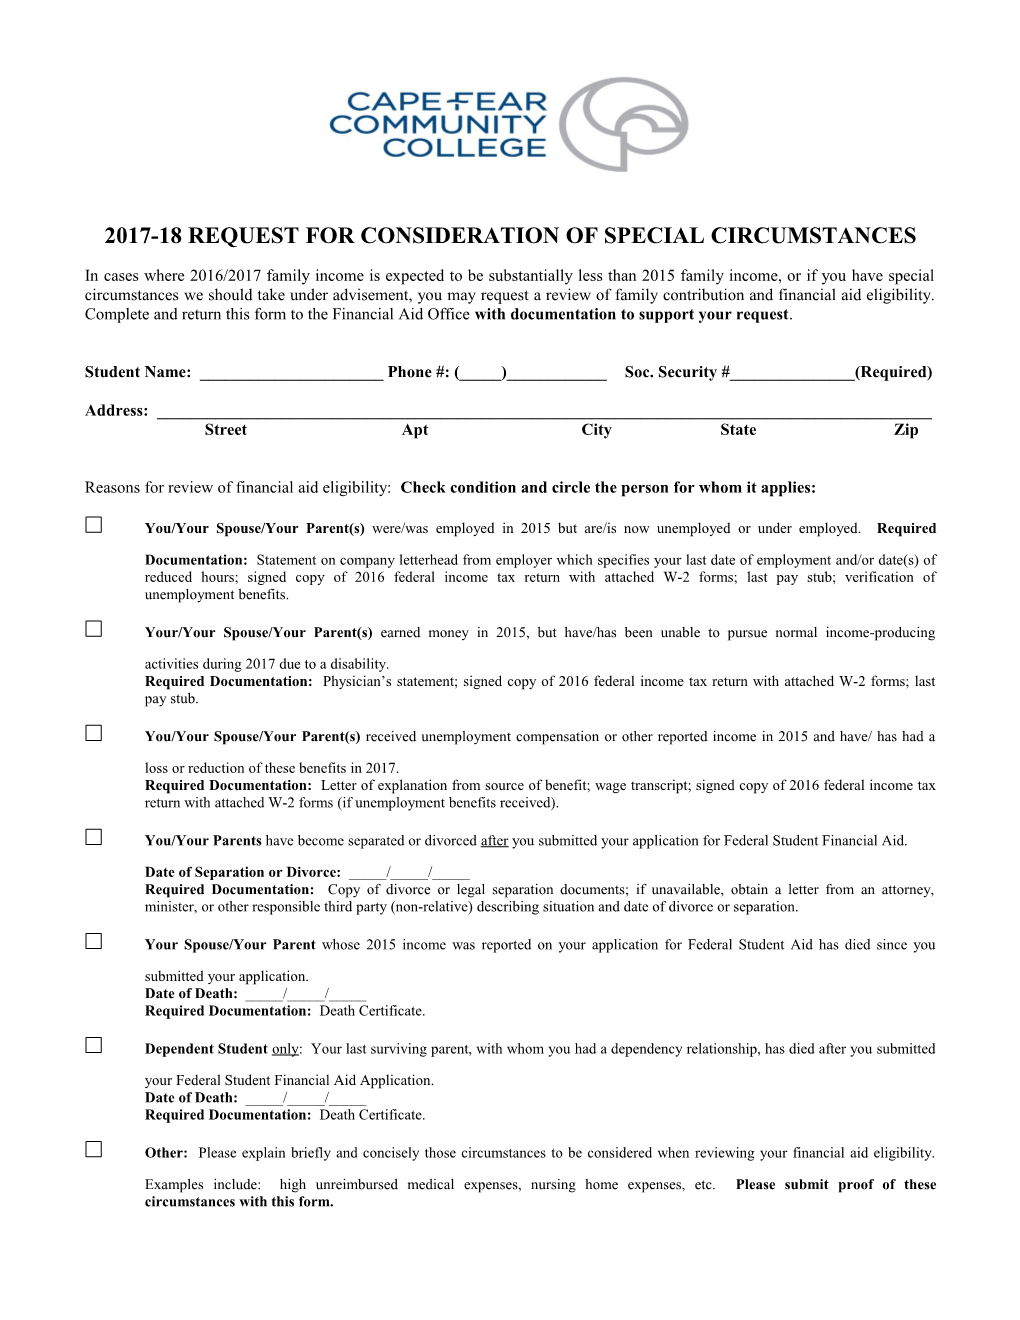 2017-18 Request for Consideration of Special Circumstances